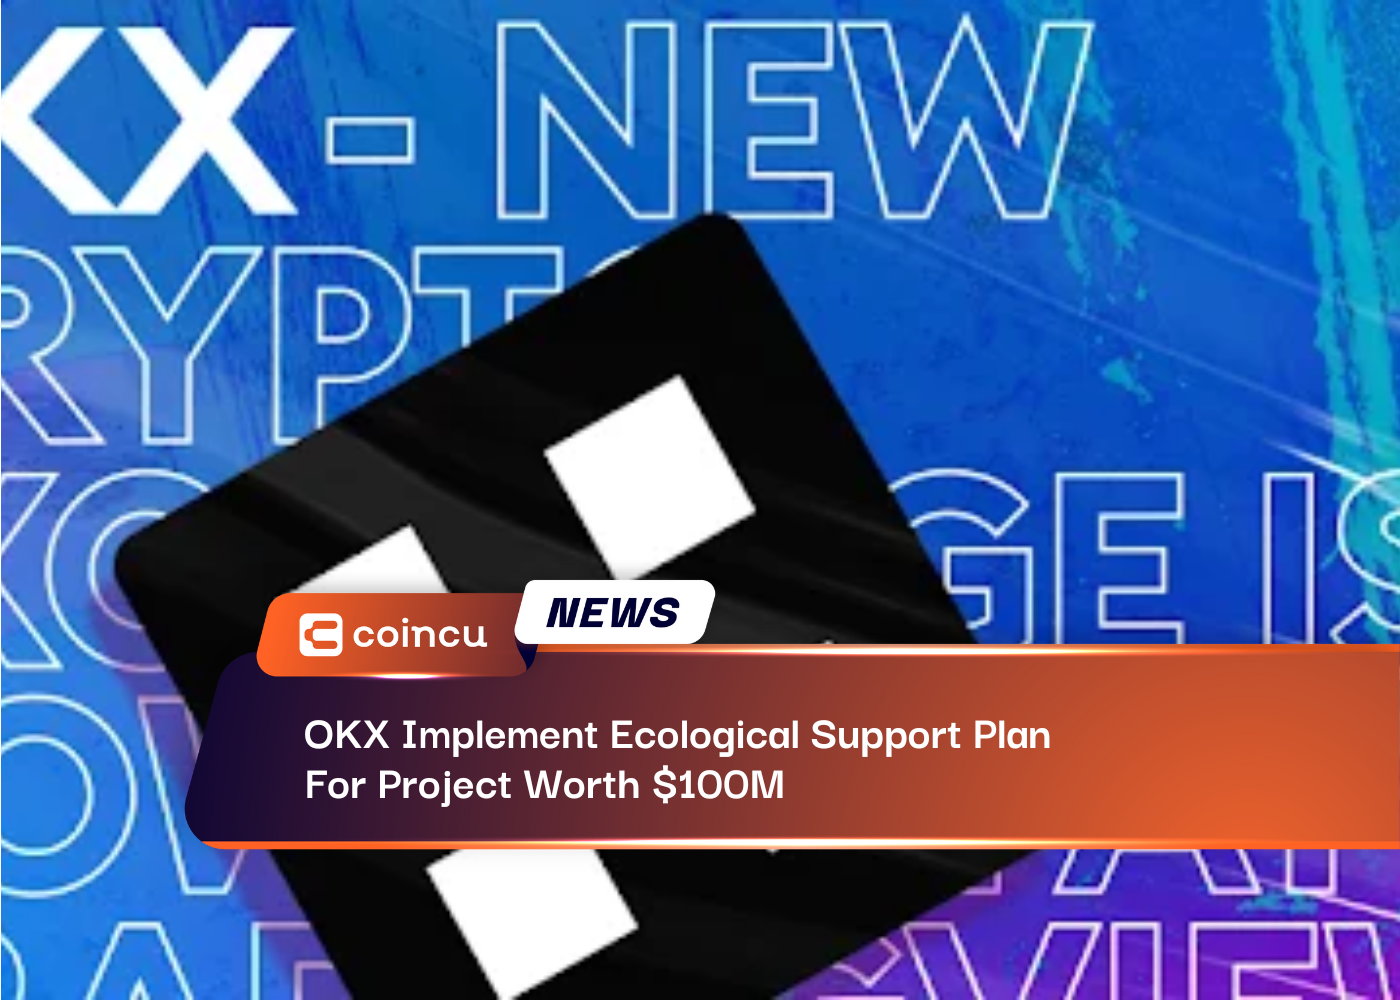 OKX Implement Ecological Support Plan For Project Worth $100M